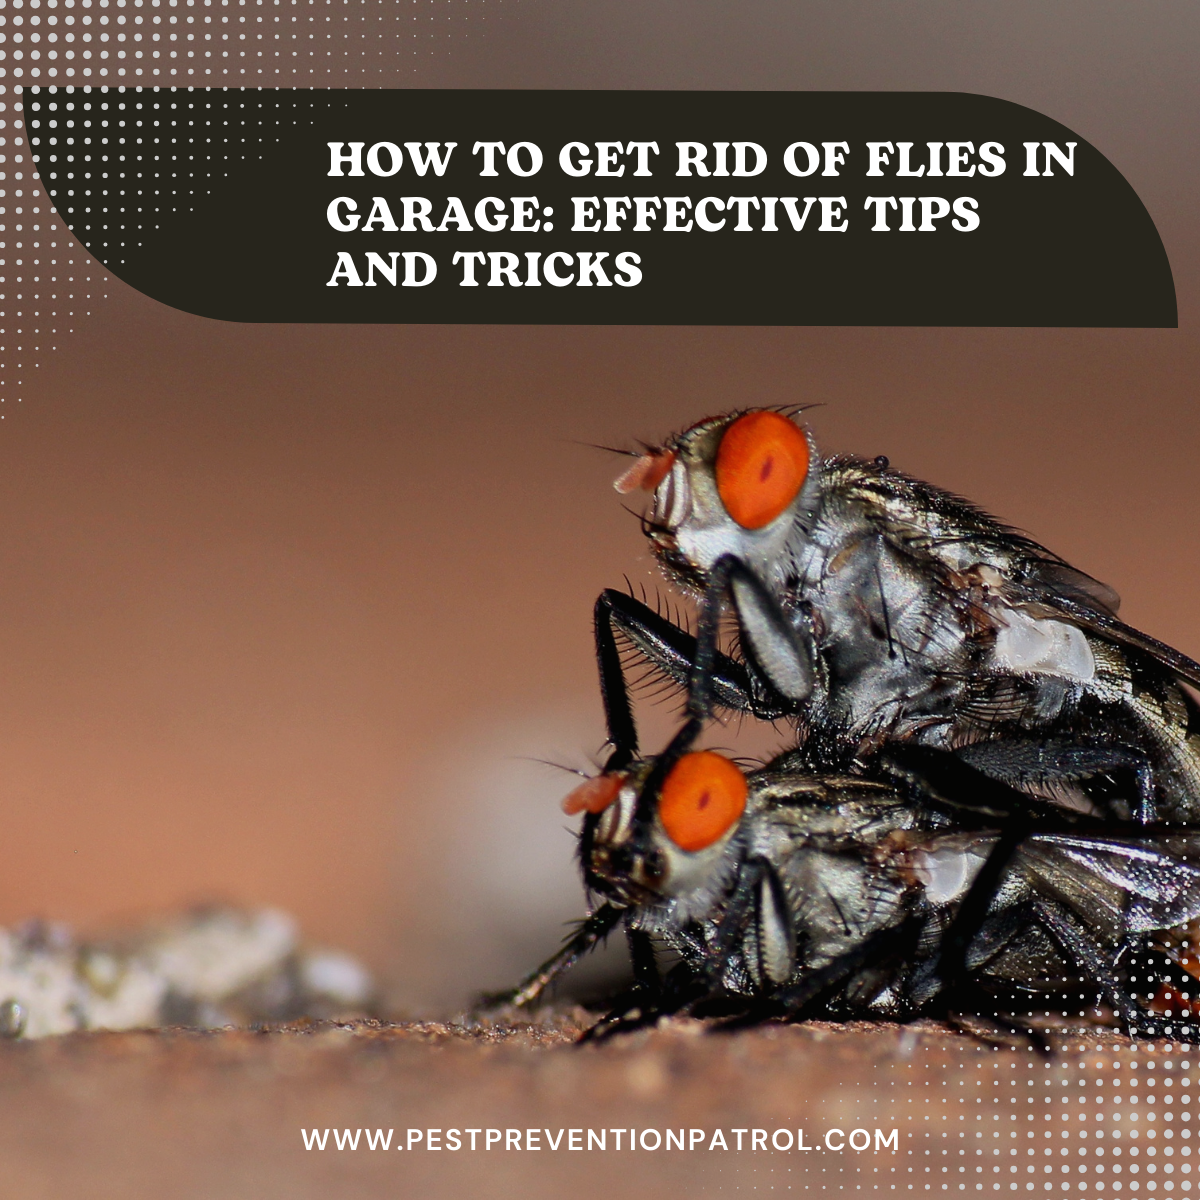 How to Get Rid of Flies in Garage_ Effective Tips and Tricks